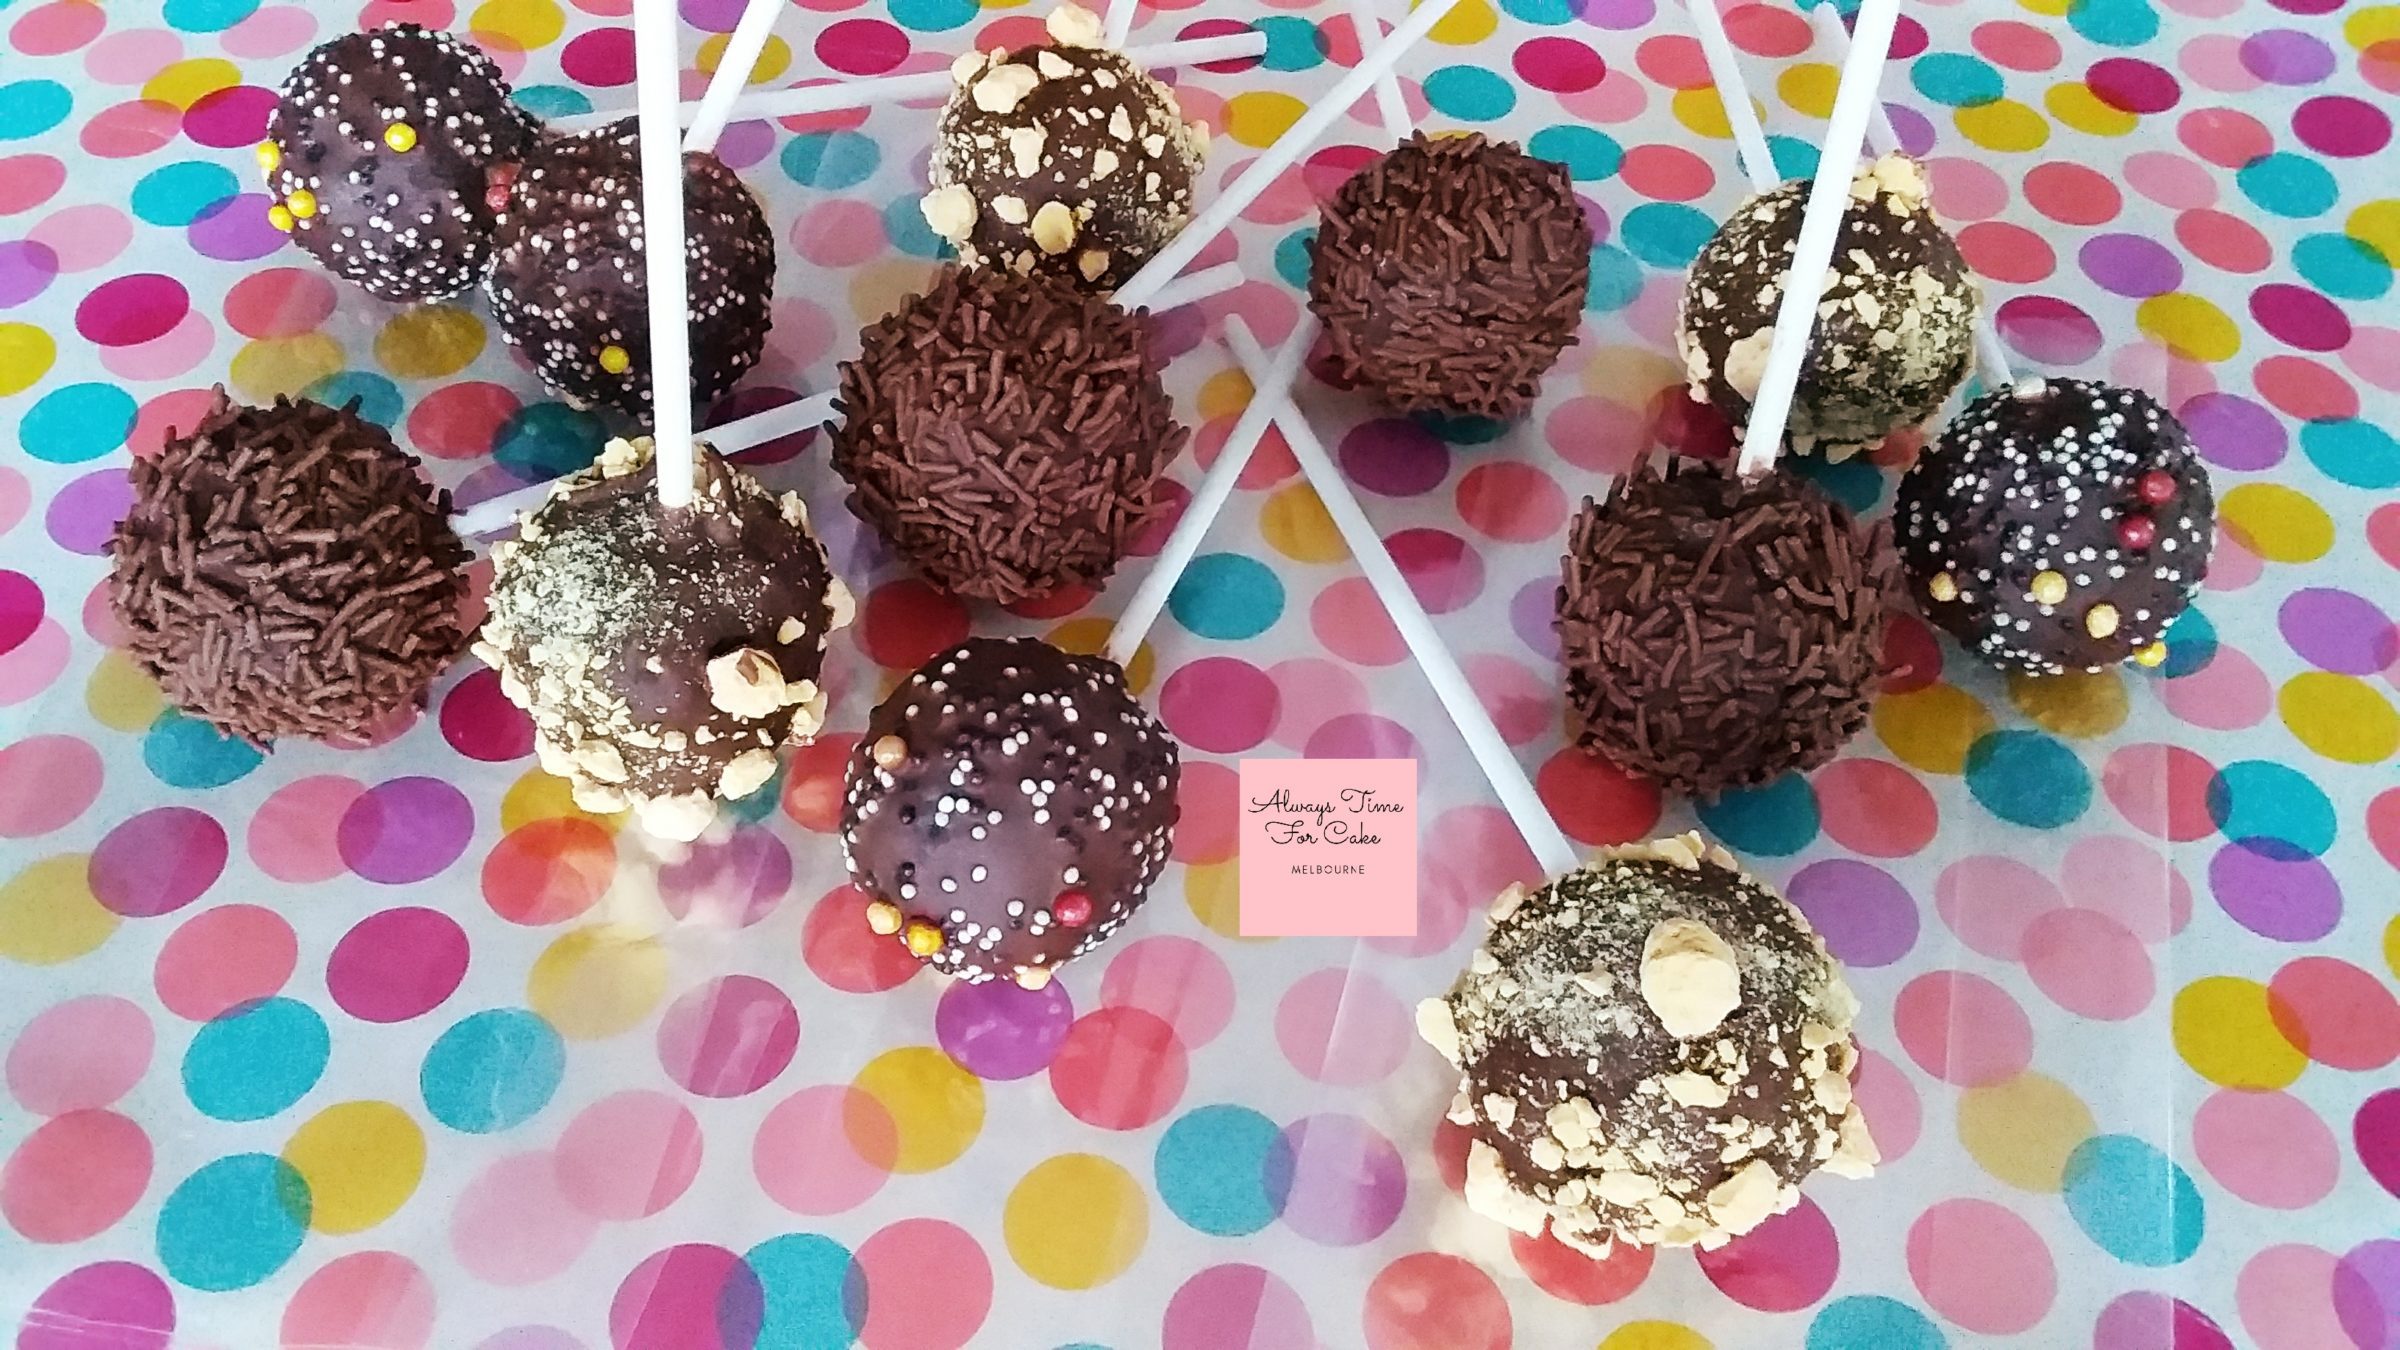 Chocolate sprinkles honey comb cake pops nut free desserts edible gifts